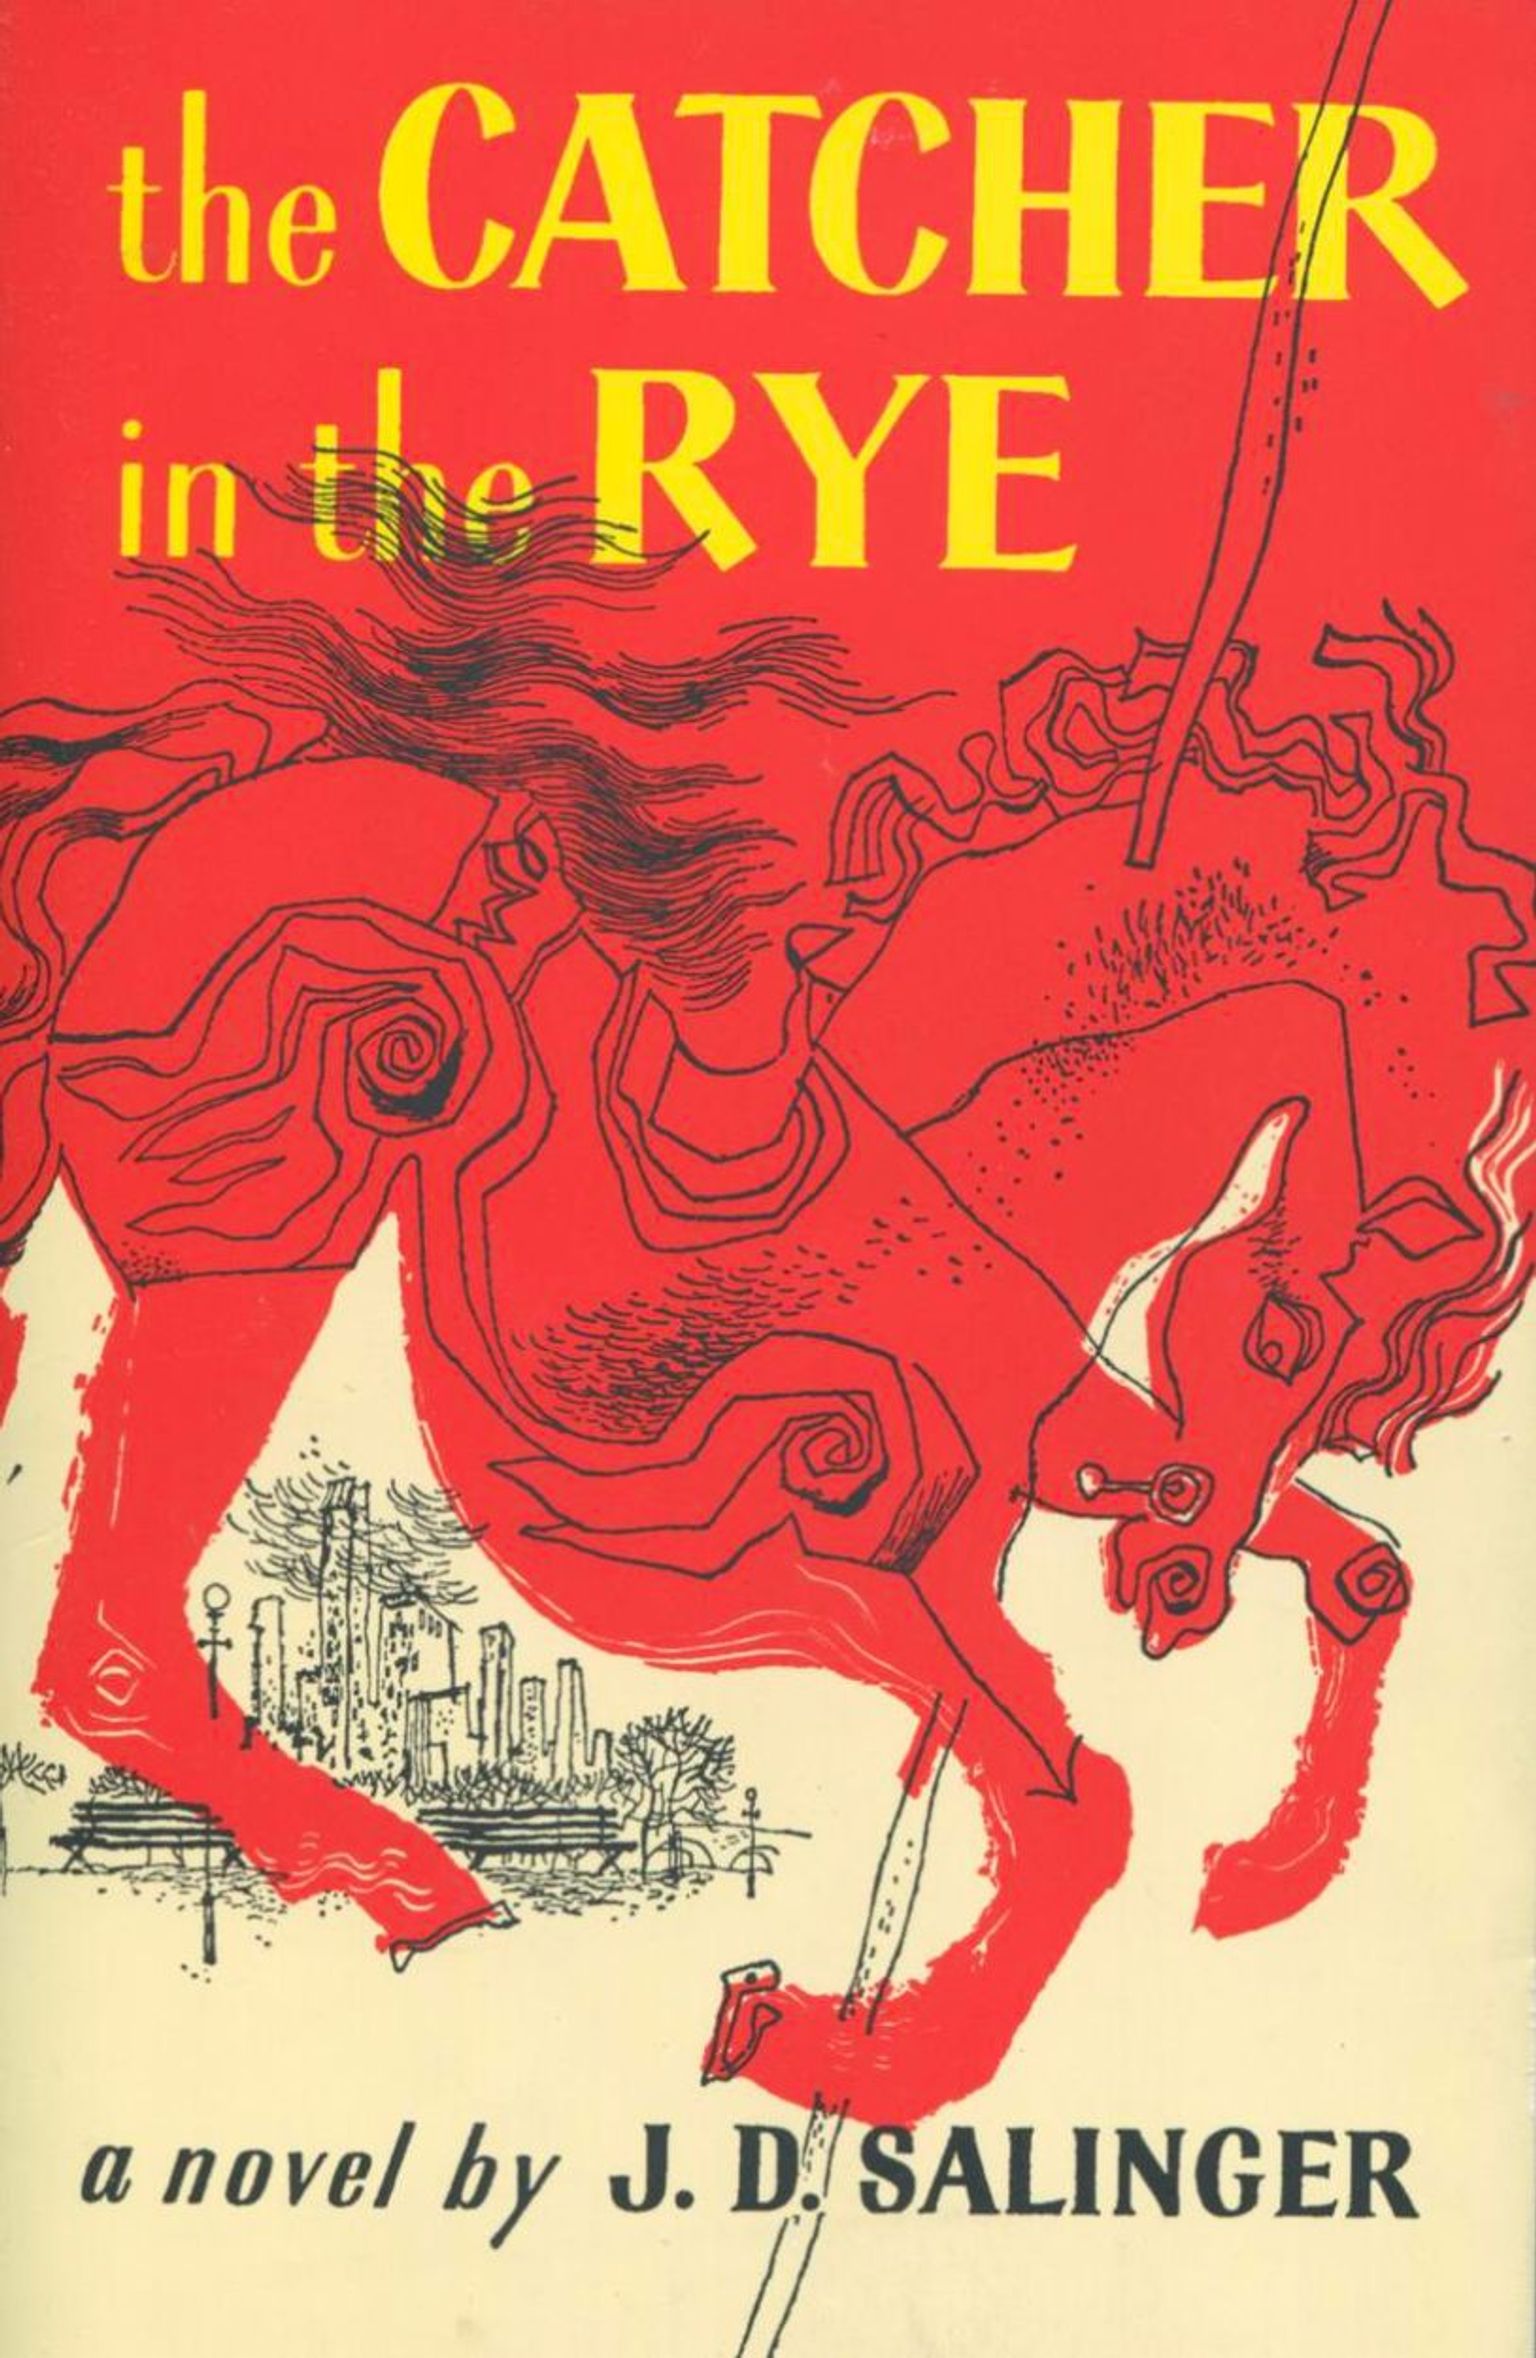 Book Recommendations - The Catcher In The Rye